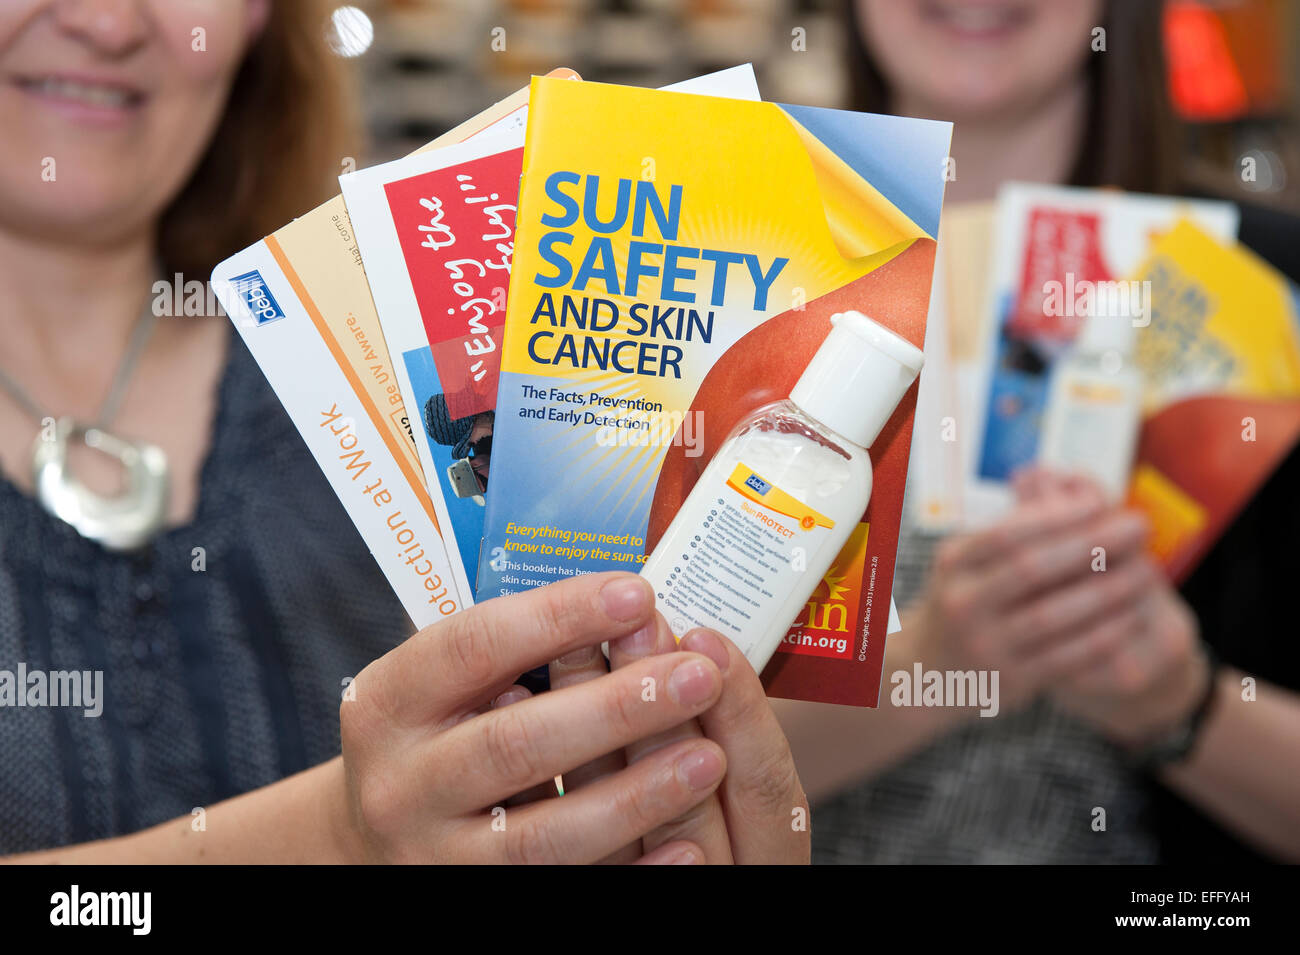 Two unidentified women hold up safety leaflets and sun cream warning about the dangers of skin cancer. Stock Photo